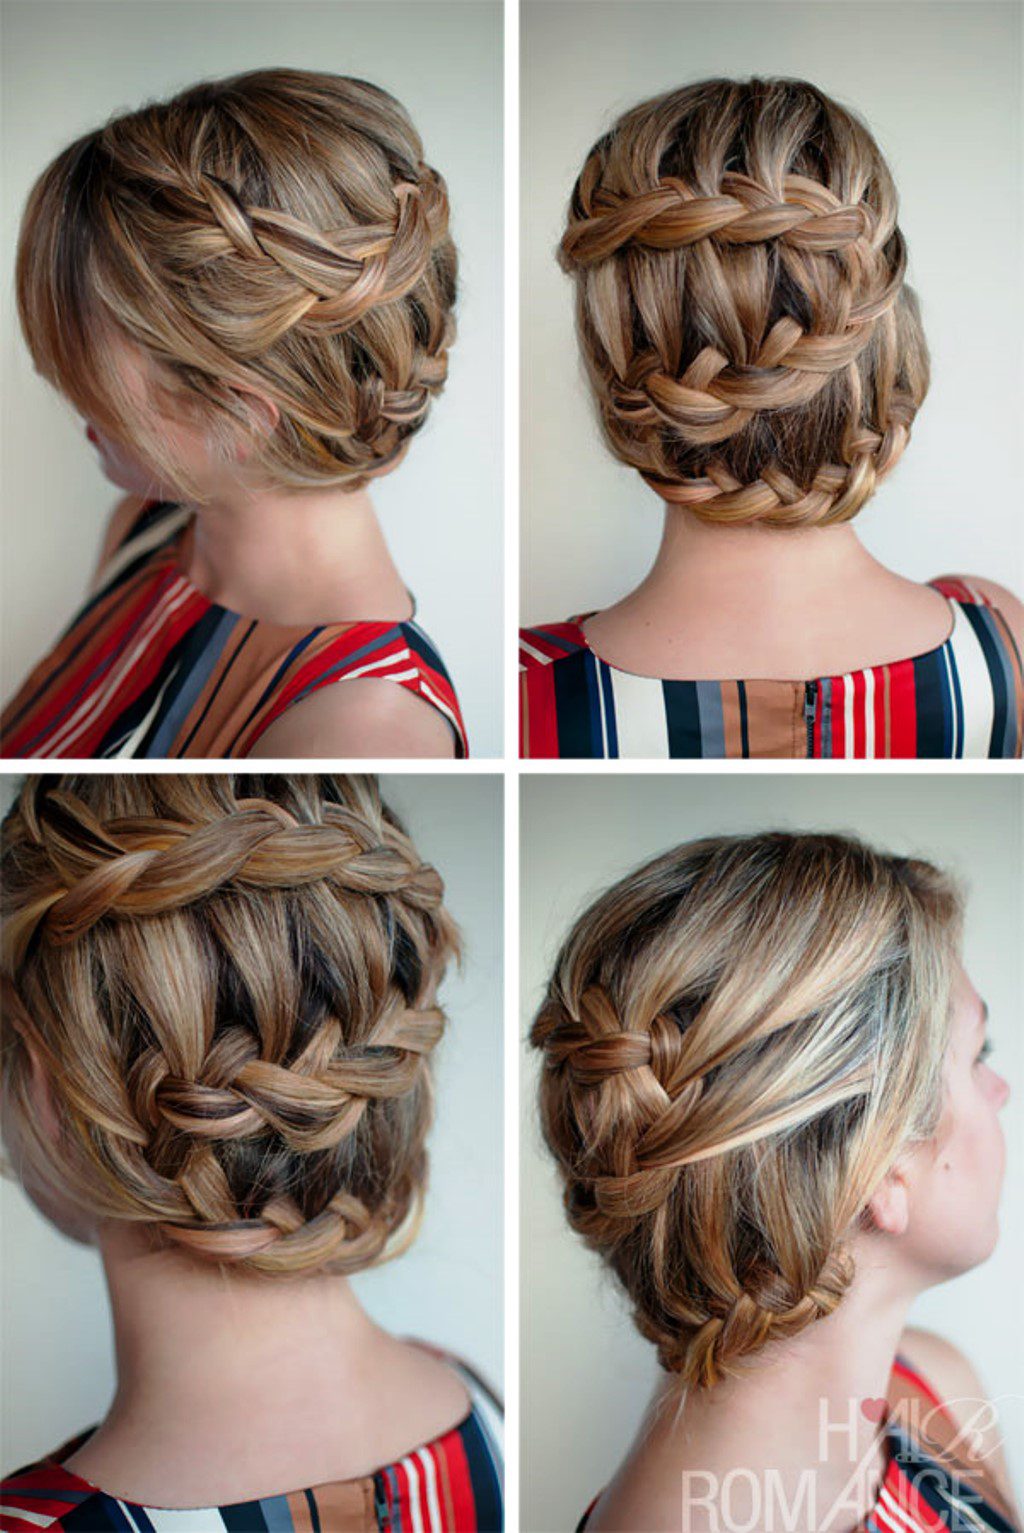 Romantic Unique Braided Updo Hairstyle